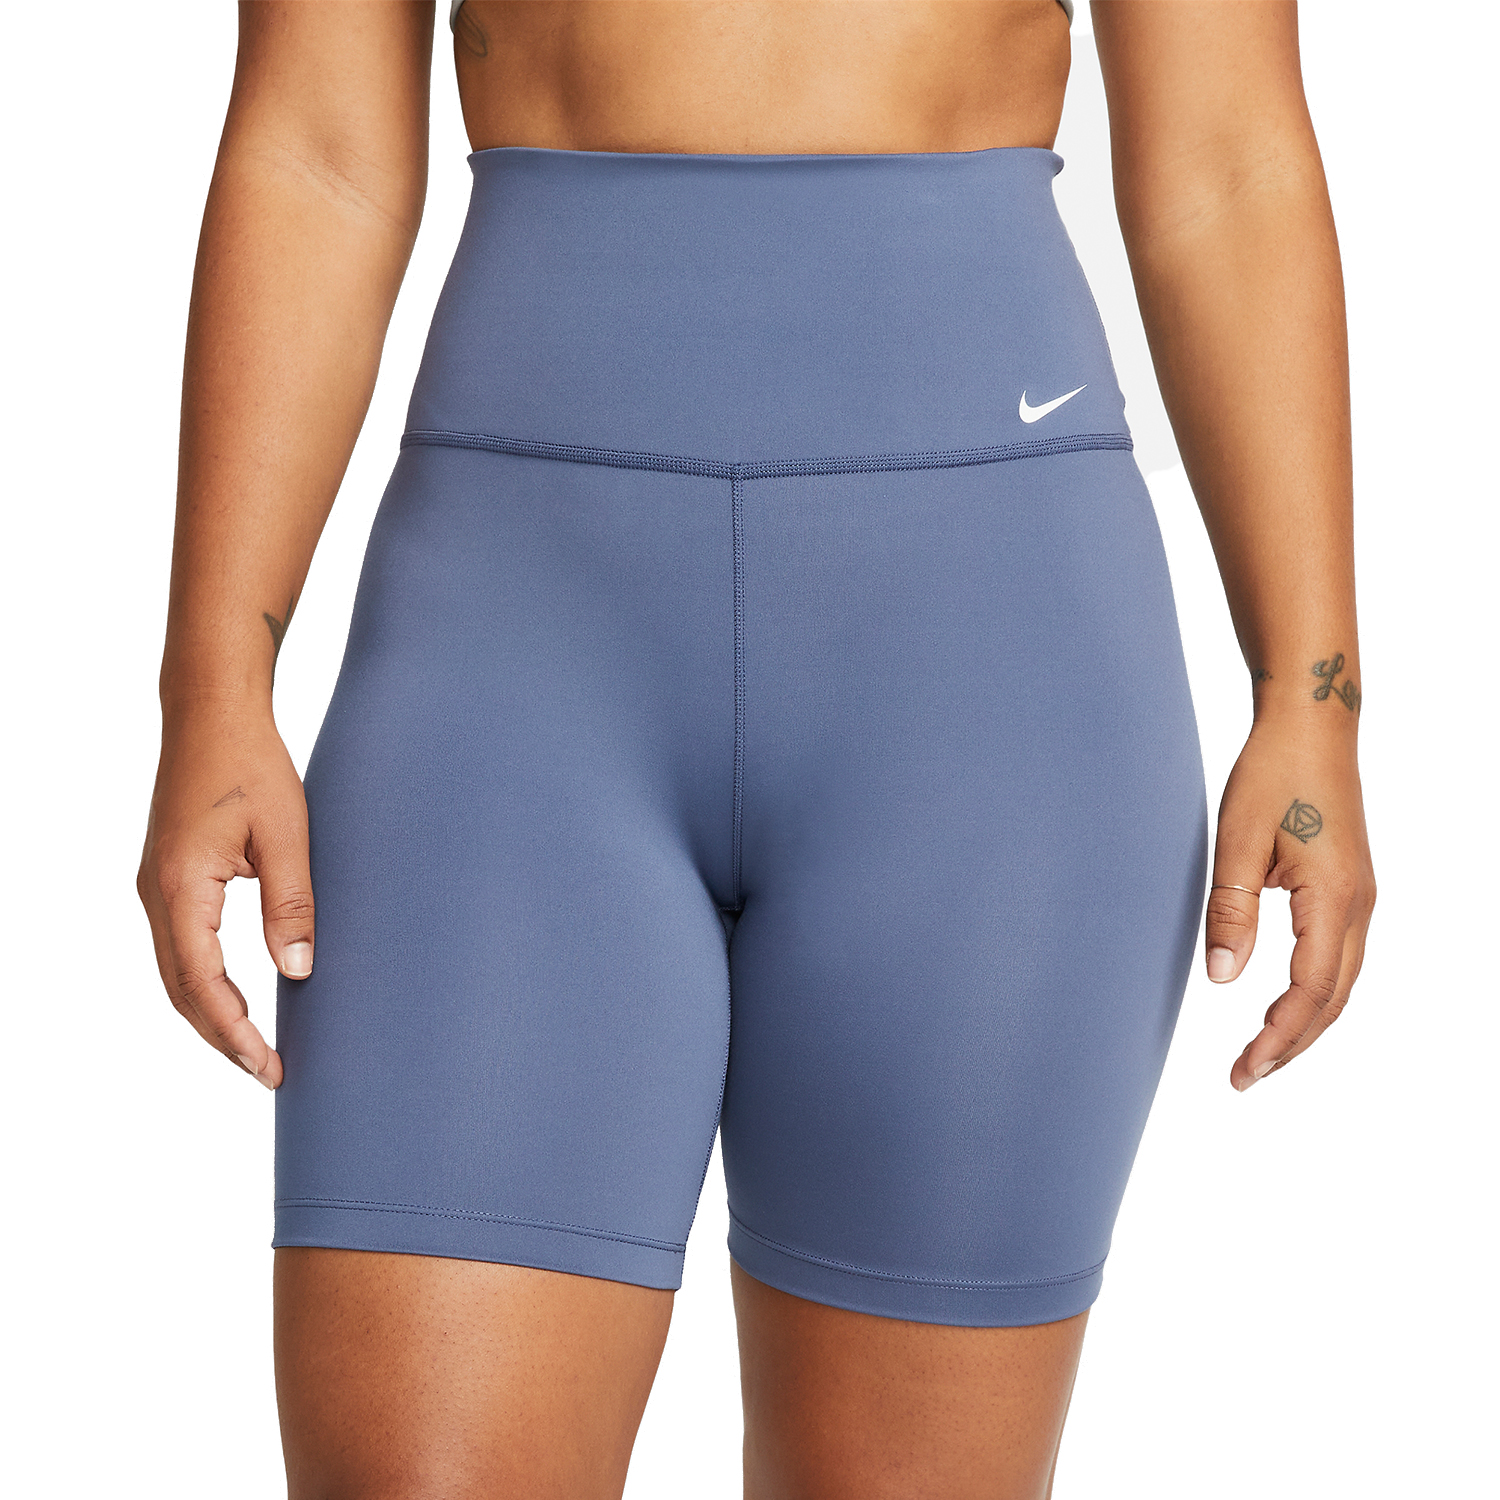 Nike Dri-FIT One 7in Women's Running Shorts - Diffused Blue